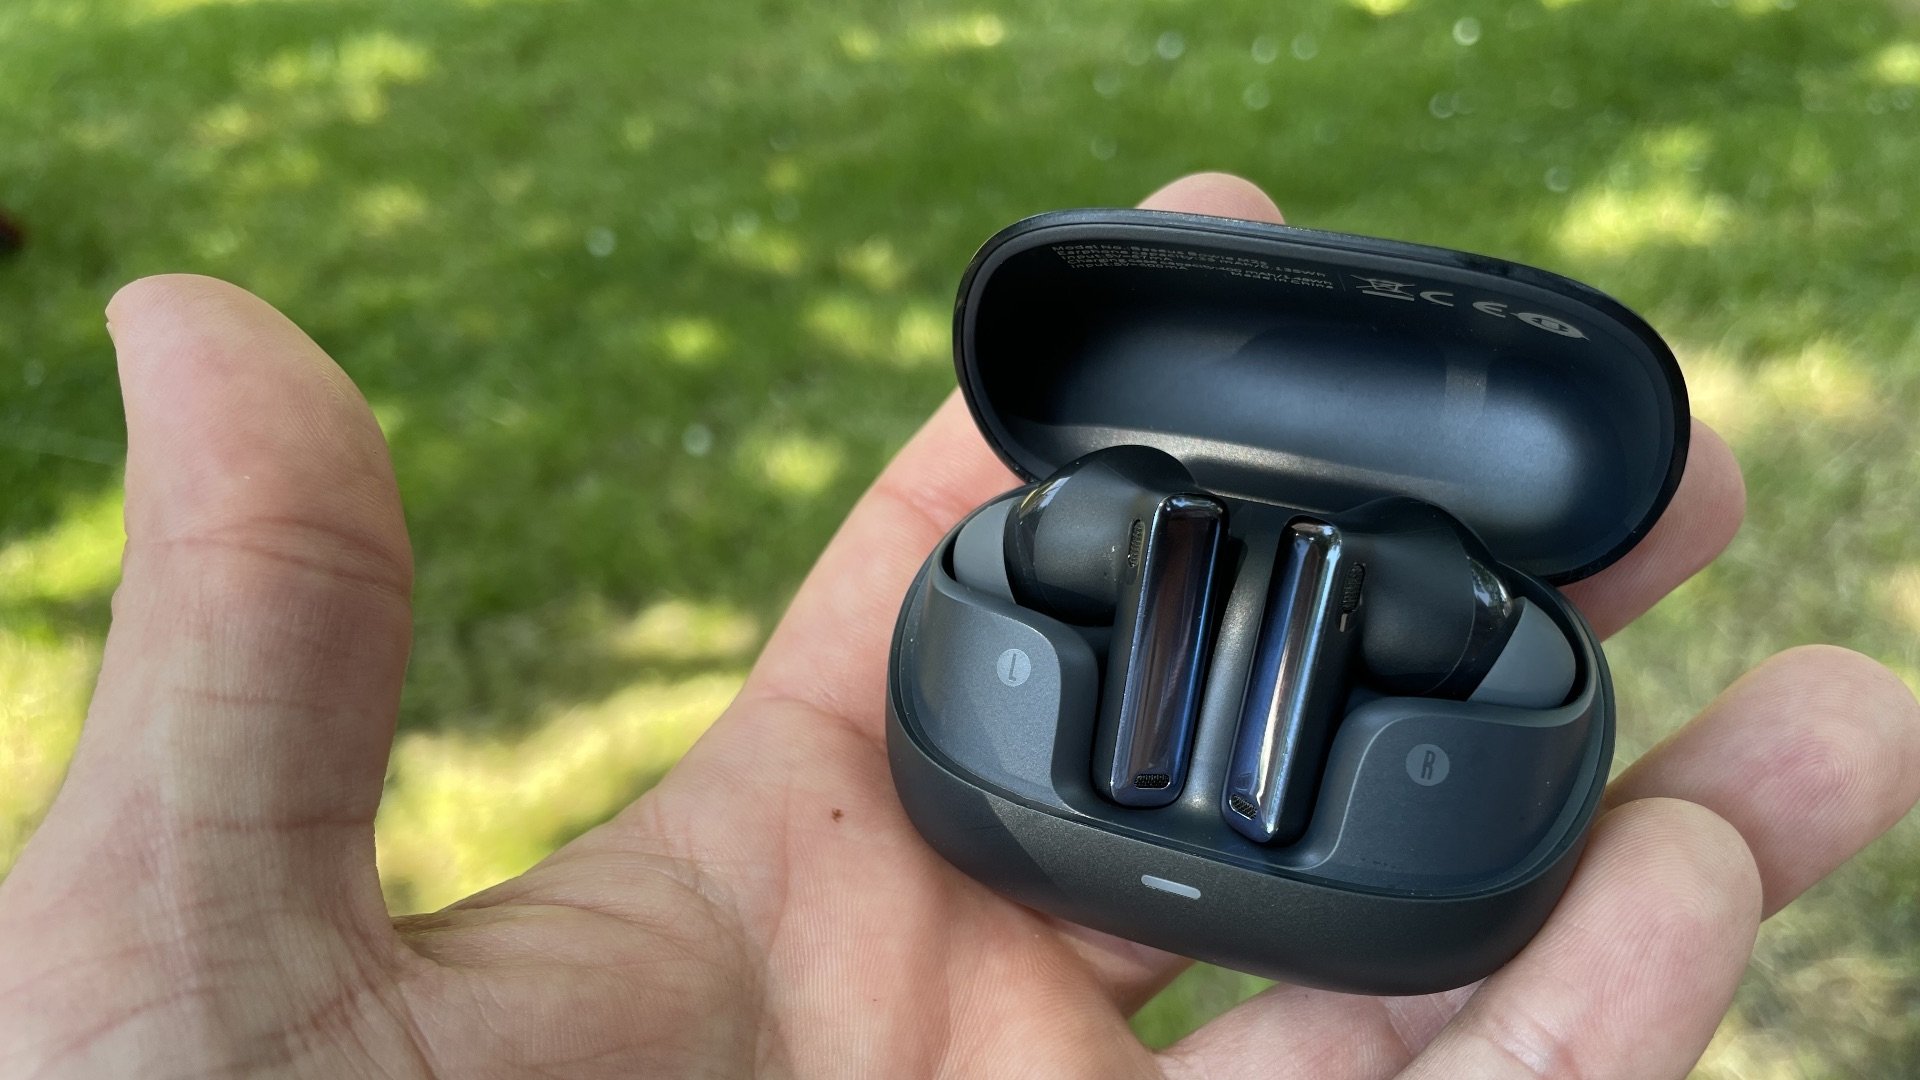 The 3 Best Earbuds Under $50 of 2023